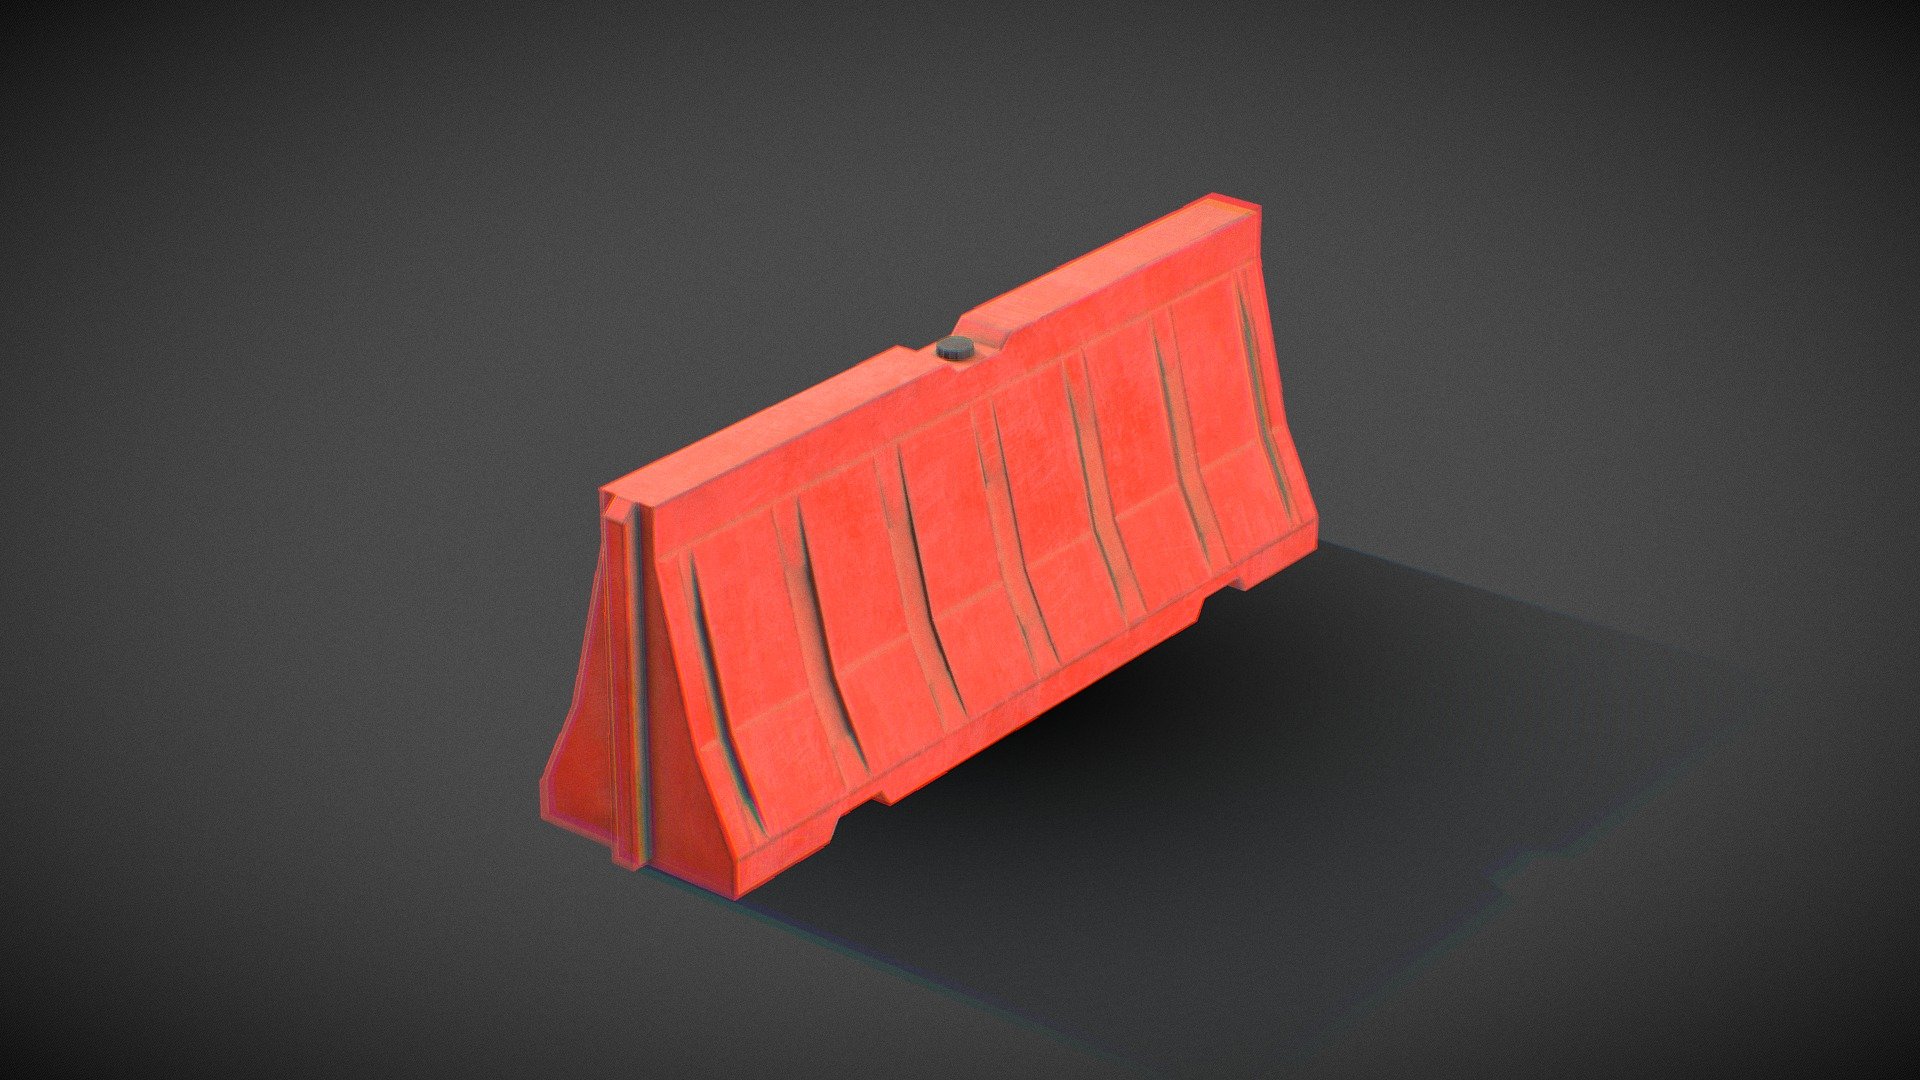 Low poly asset perfectly optimized and mapped to represent a higher polygon density. You can use it in VR, smartphone games, or environments where few polygons are needed. Intended for use in graphics engines such as Unity and Unreal Engine, with the current configuration of PBR materials.

This prop belongs to an industrial theme pack, if you need a specific prop let us know and we will add it for sale.

*file size is heavy due to 2k textures.

Developed by Outlier Spa 3d model